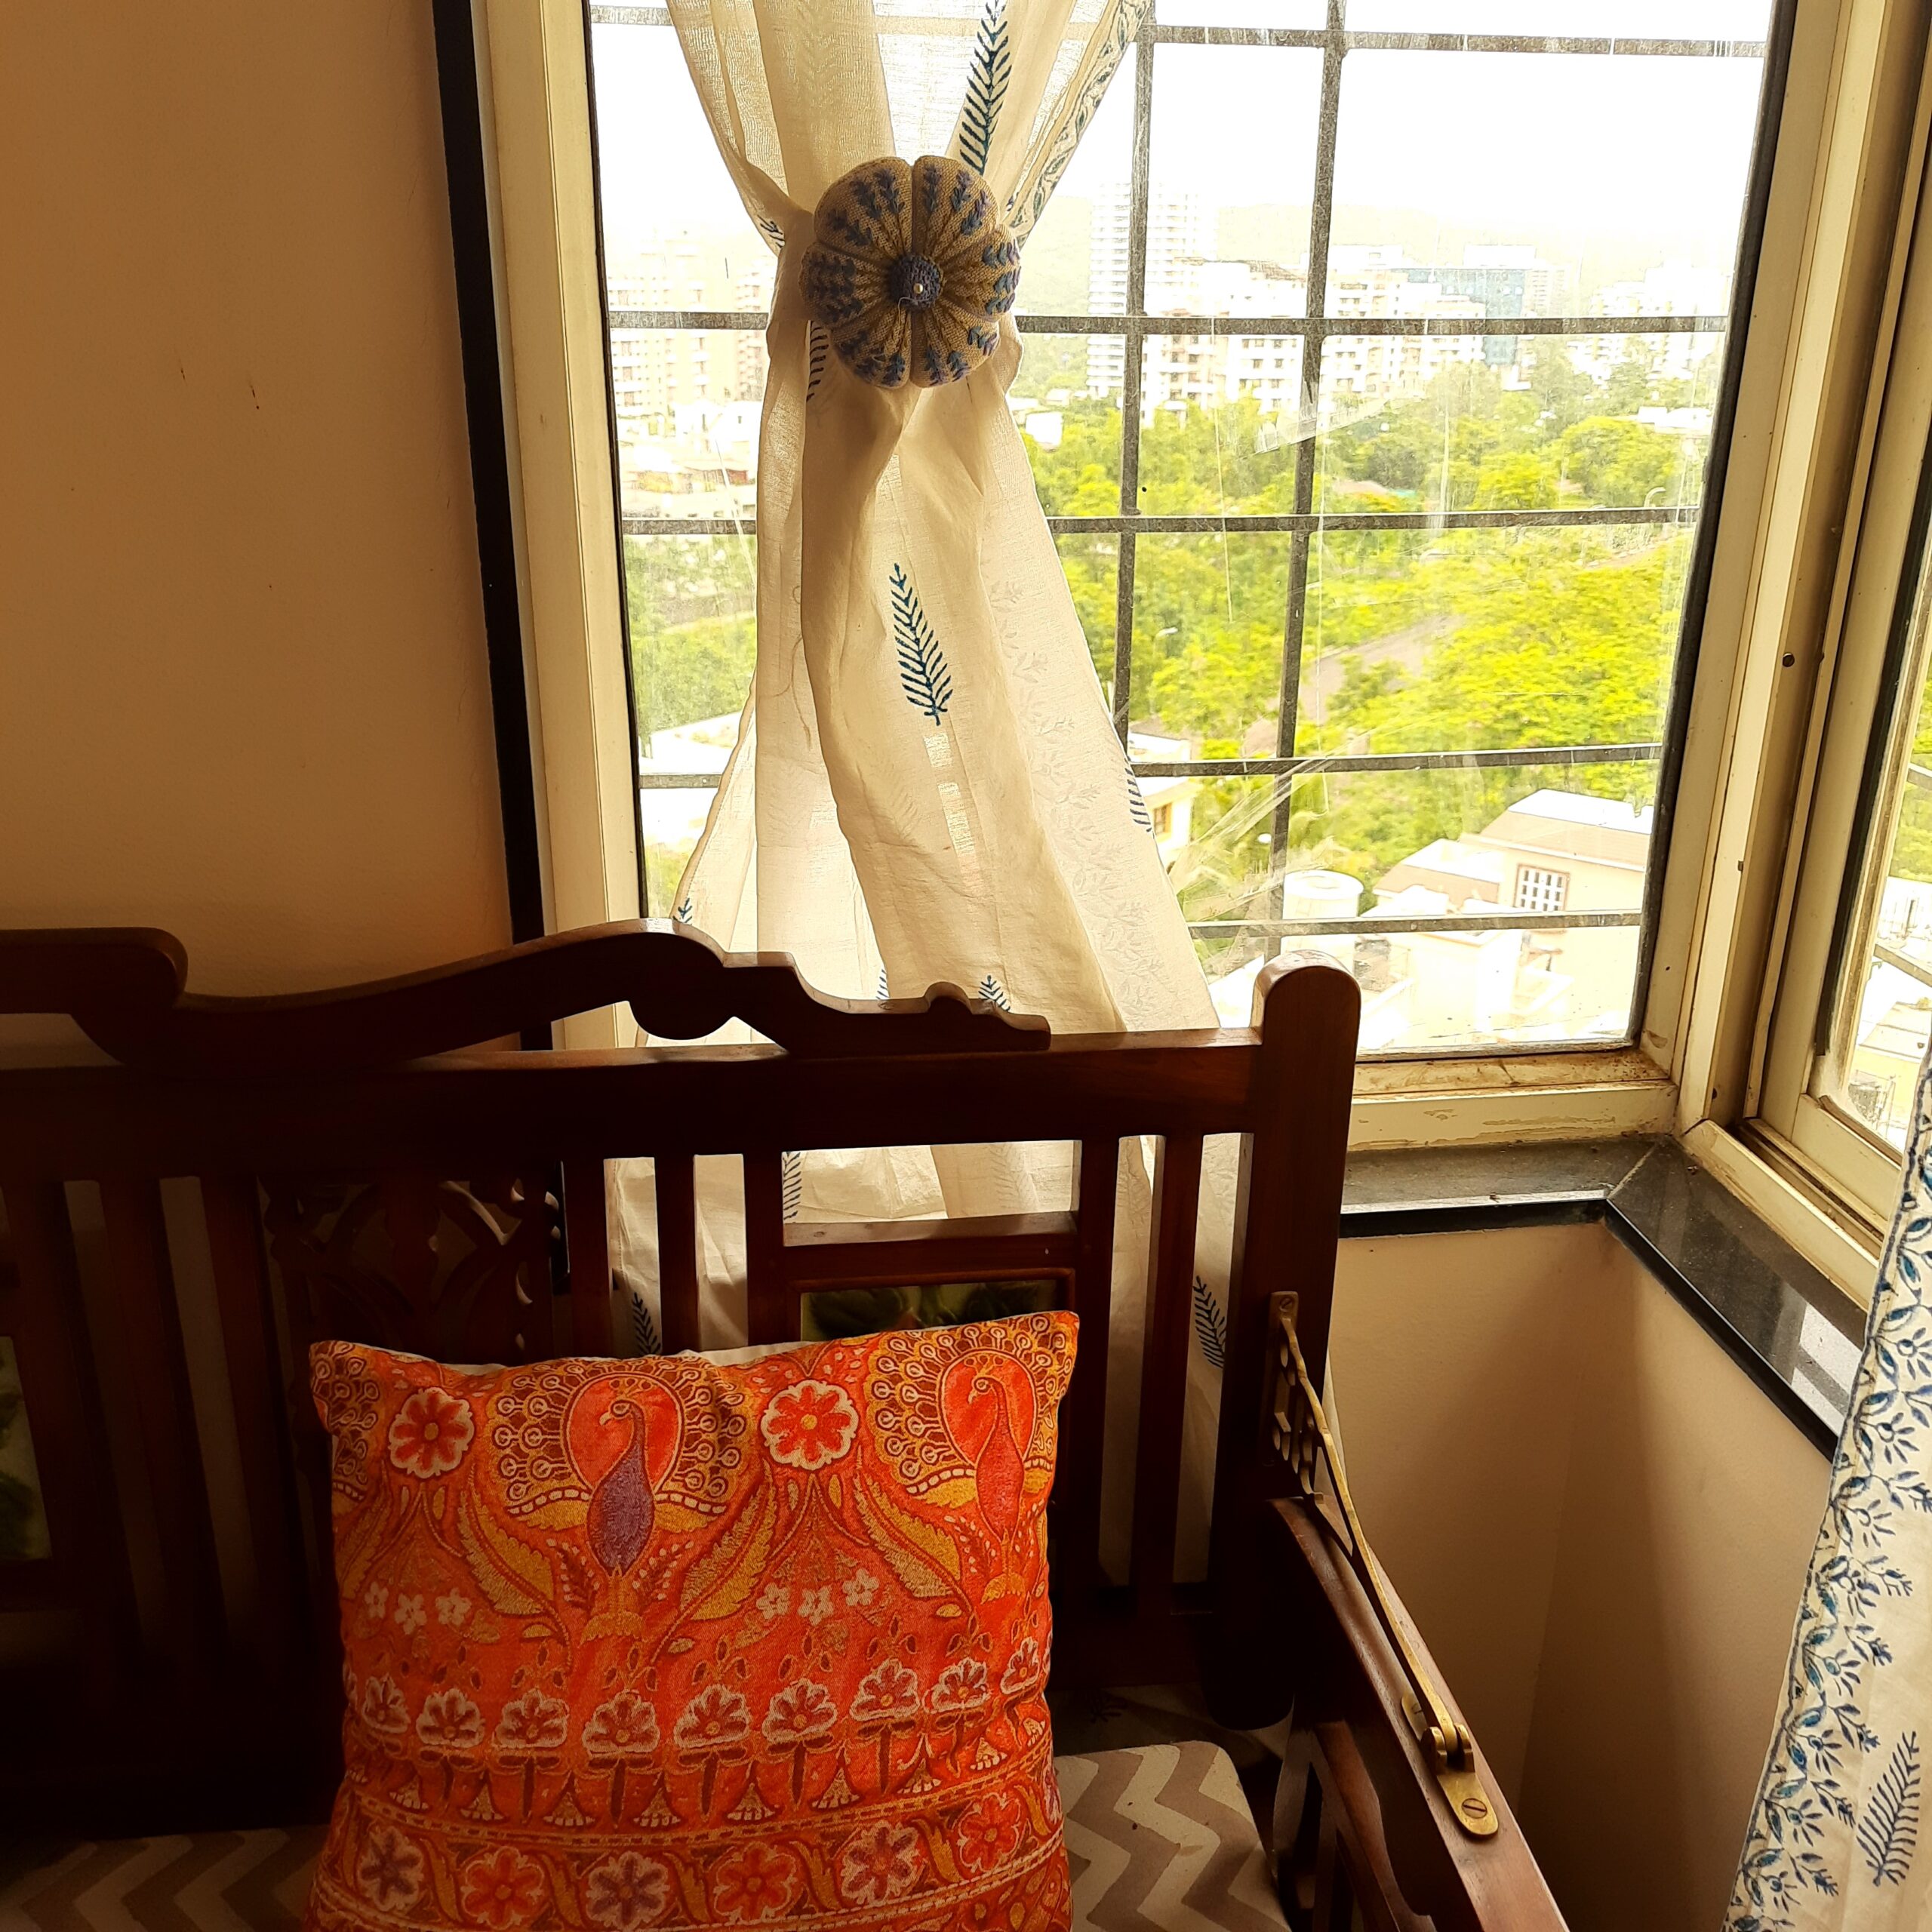 The joys of the monsoons is to make window decor light and breezy | Monsoon decor and living edit by Sharon Dsouza